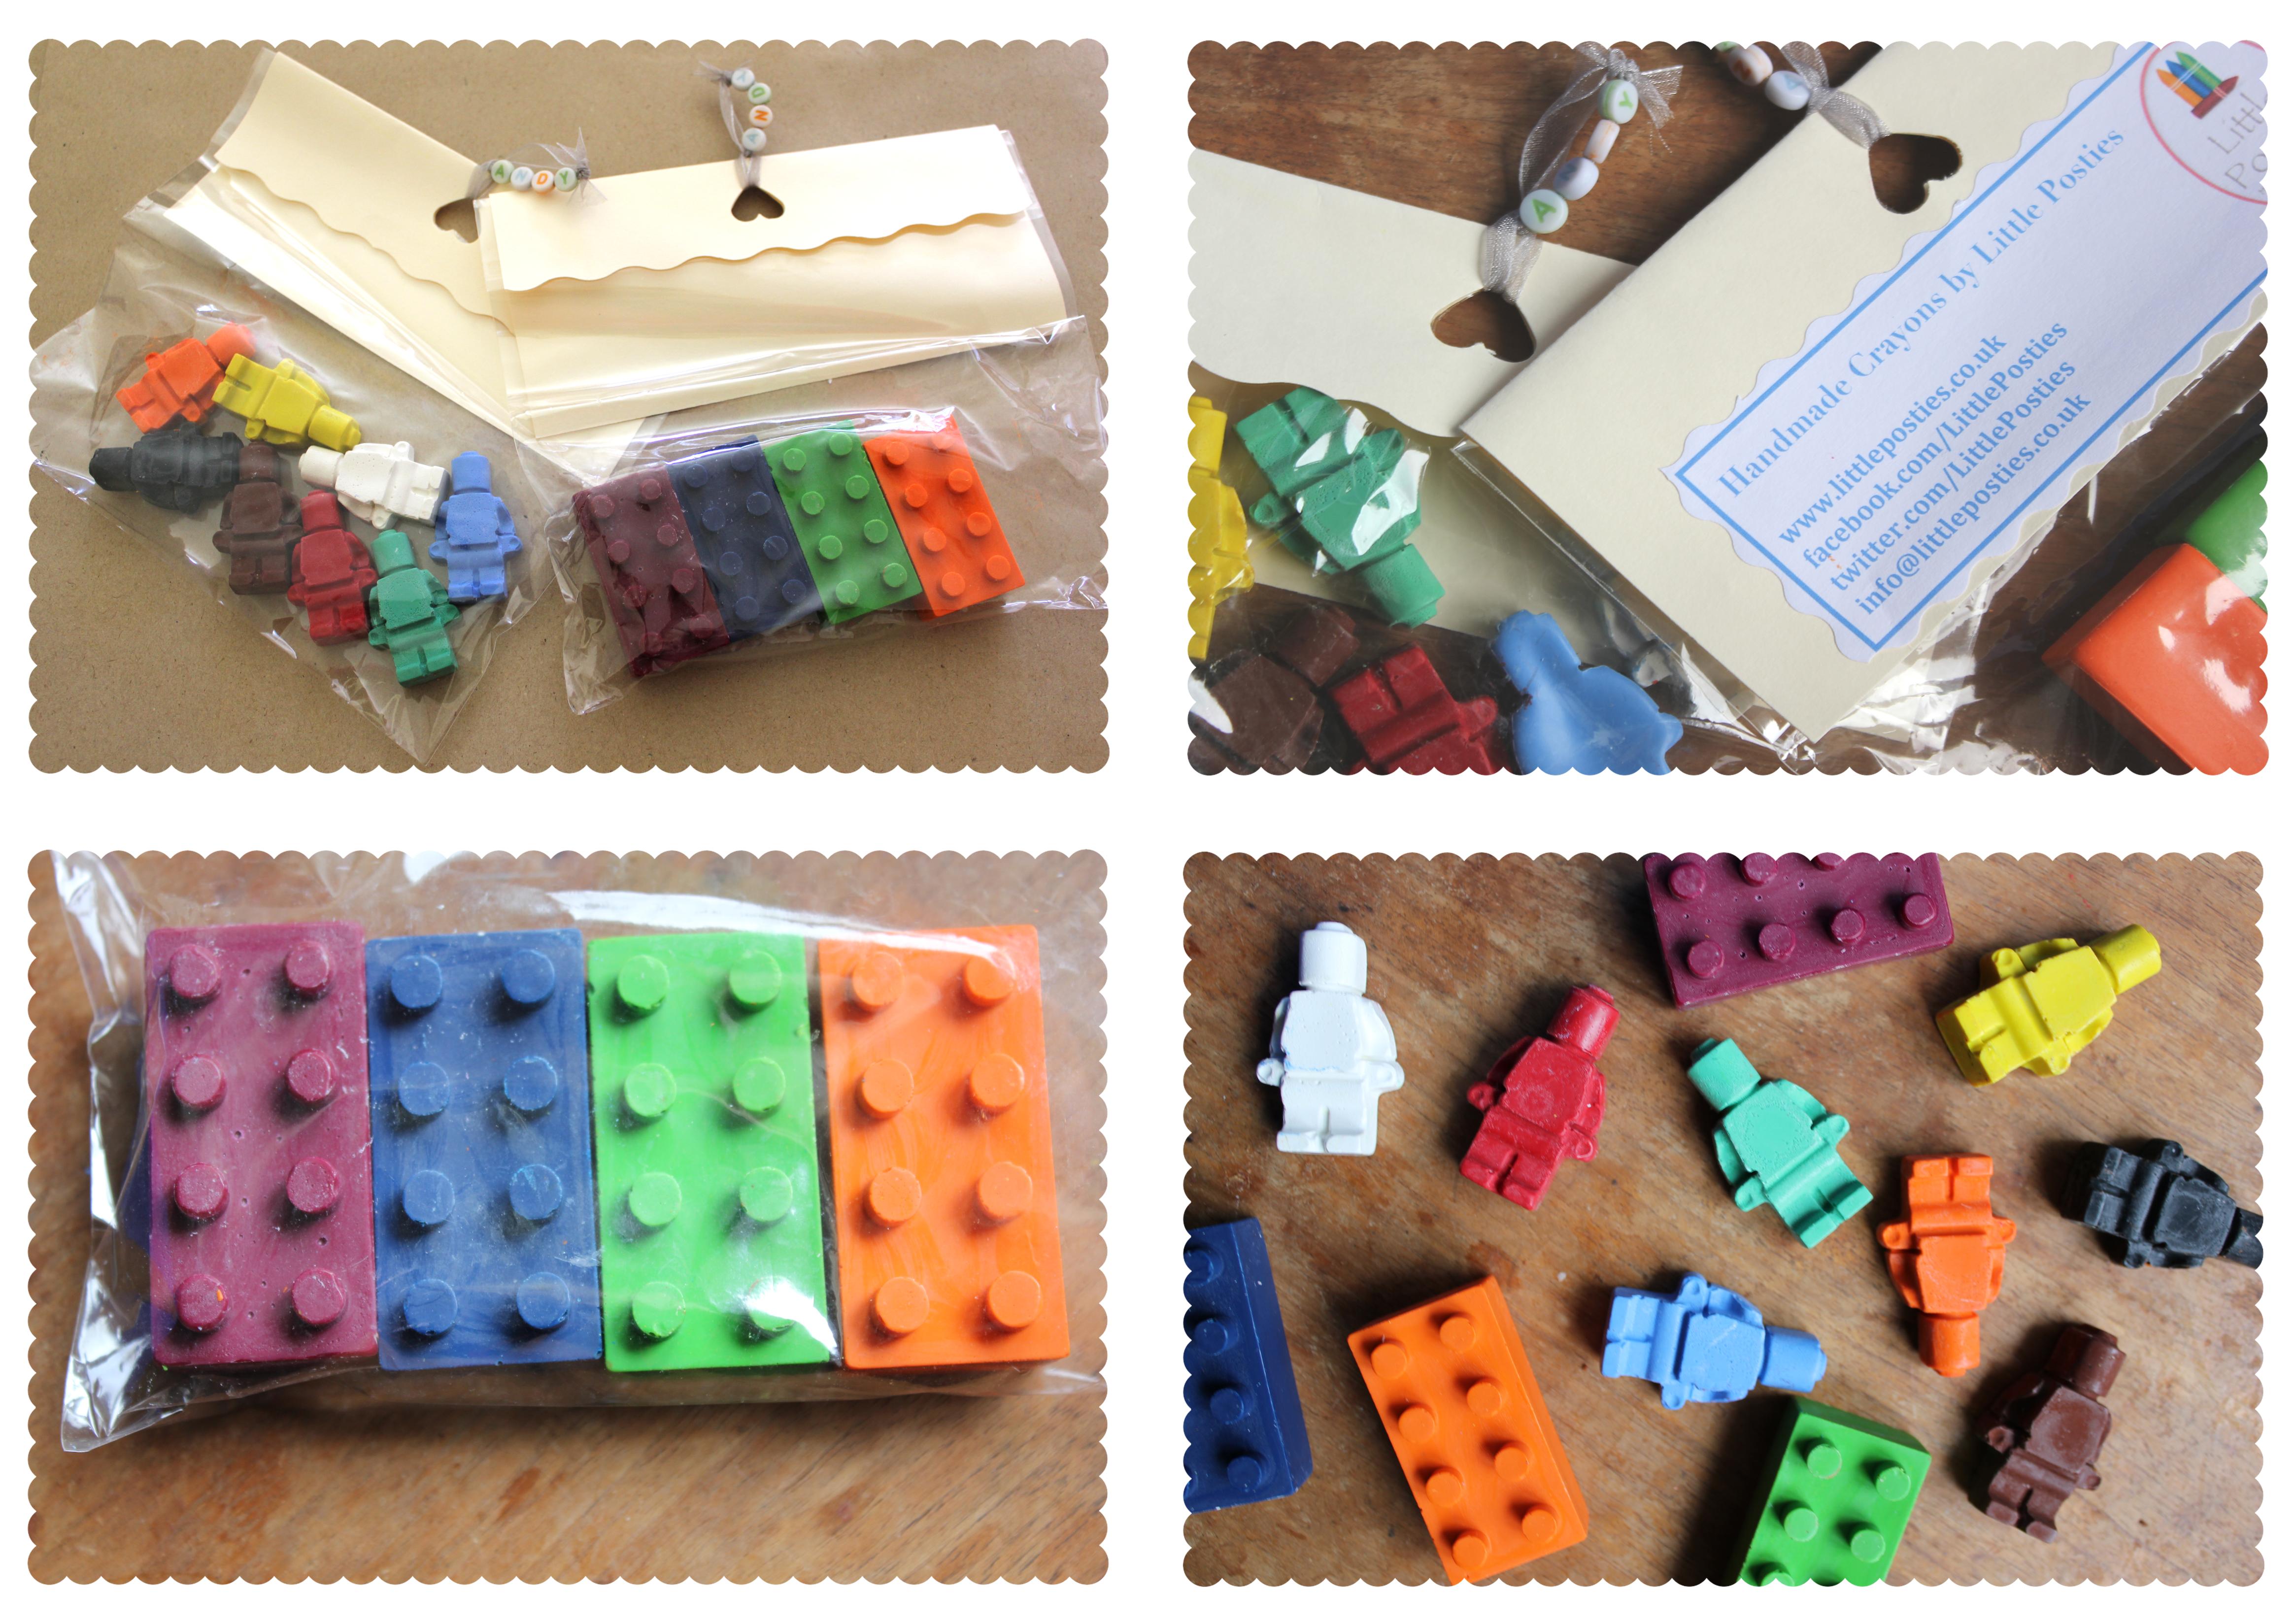 How to Make LEGO Crayons - That Brick Life